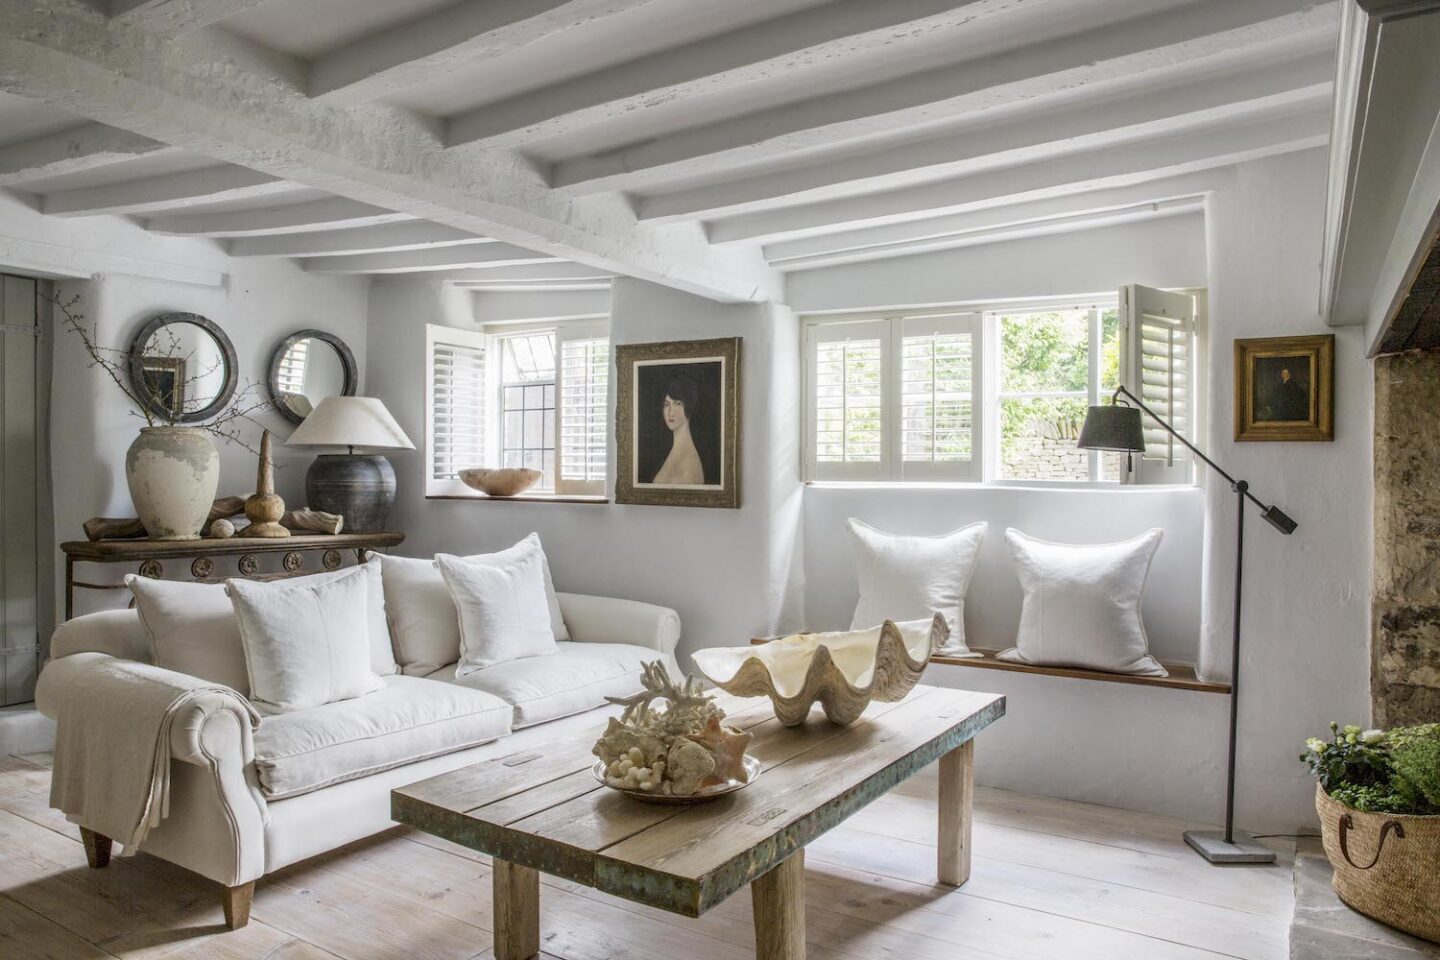 Charming and serene with pale colors and European antiques - a Cotswold cottage interior by Anton & K.